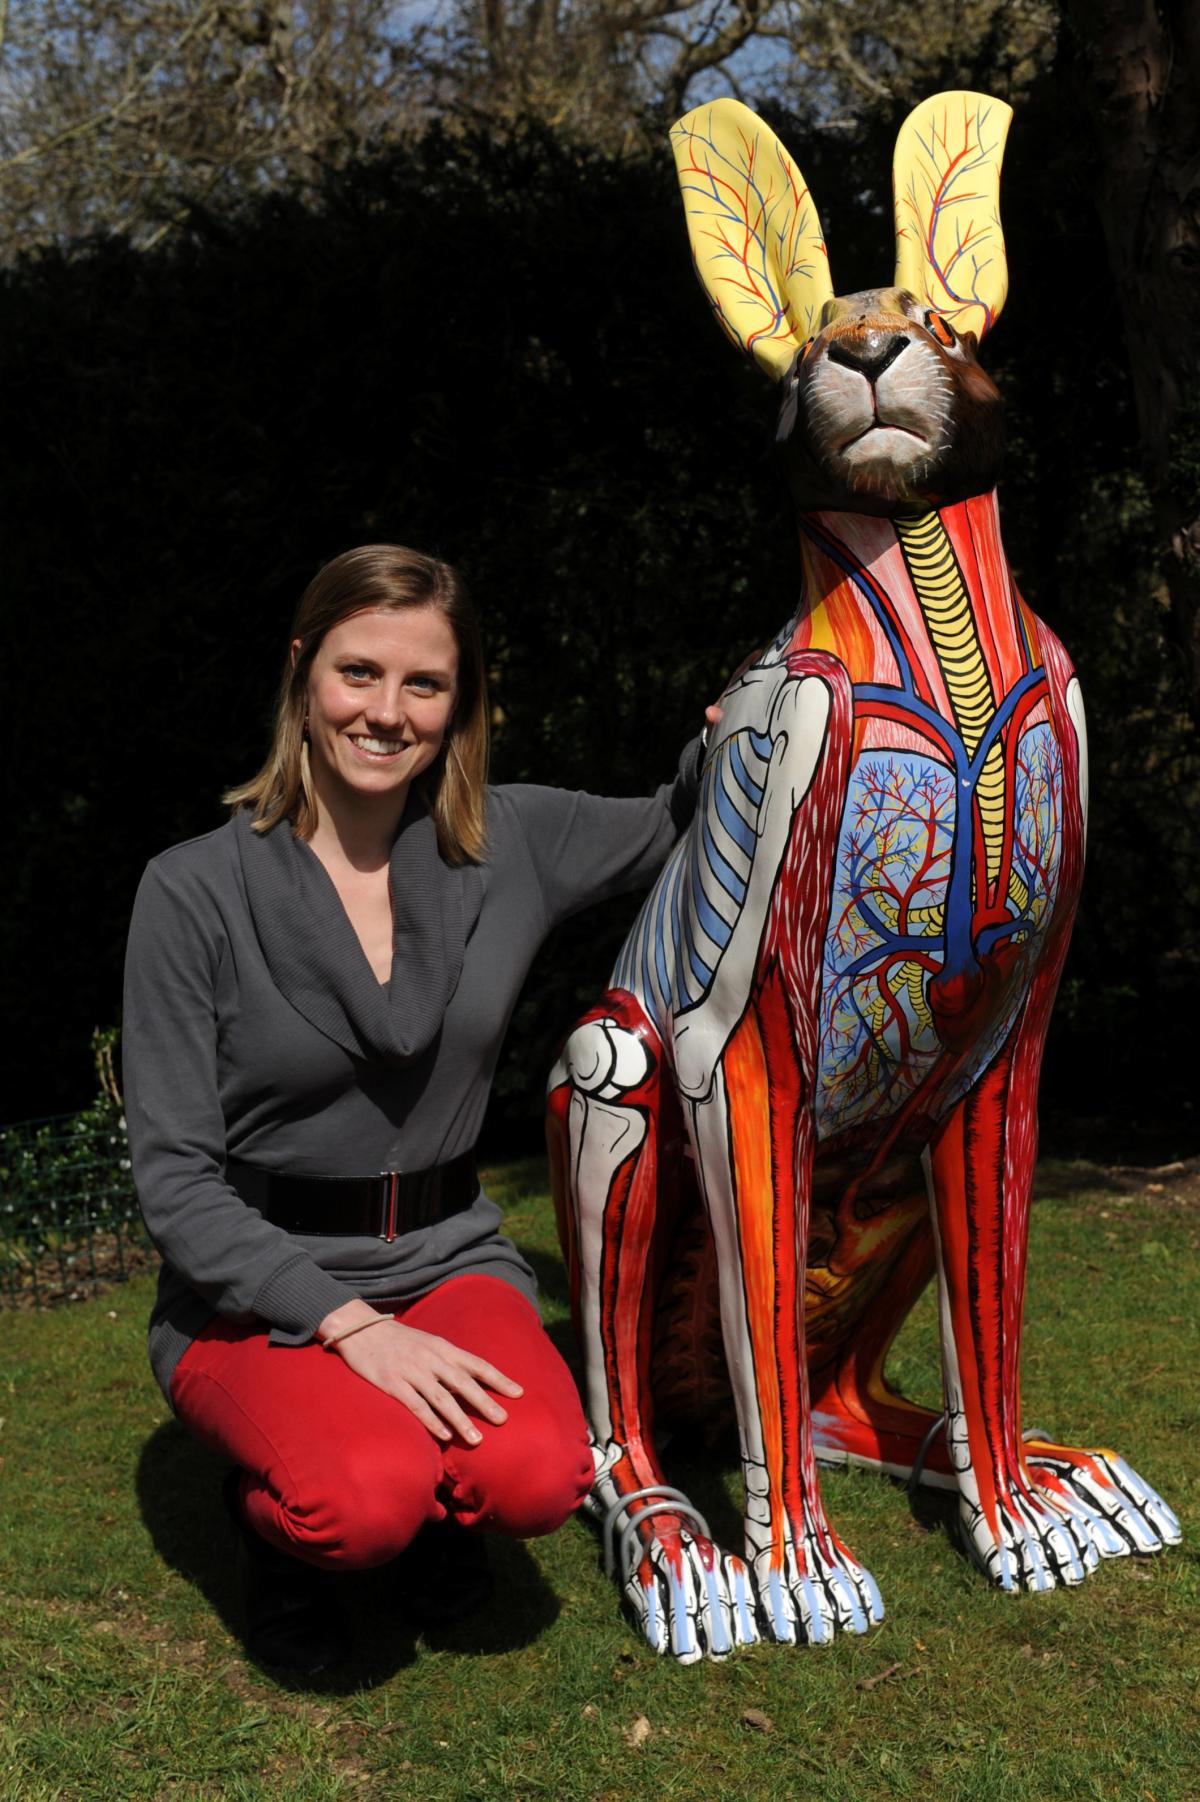 Meghan Meeks with The Bare Hare by Gillian Higgins at the Royal Agricultural University 